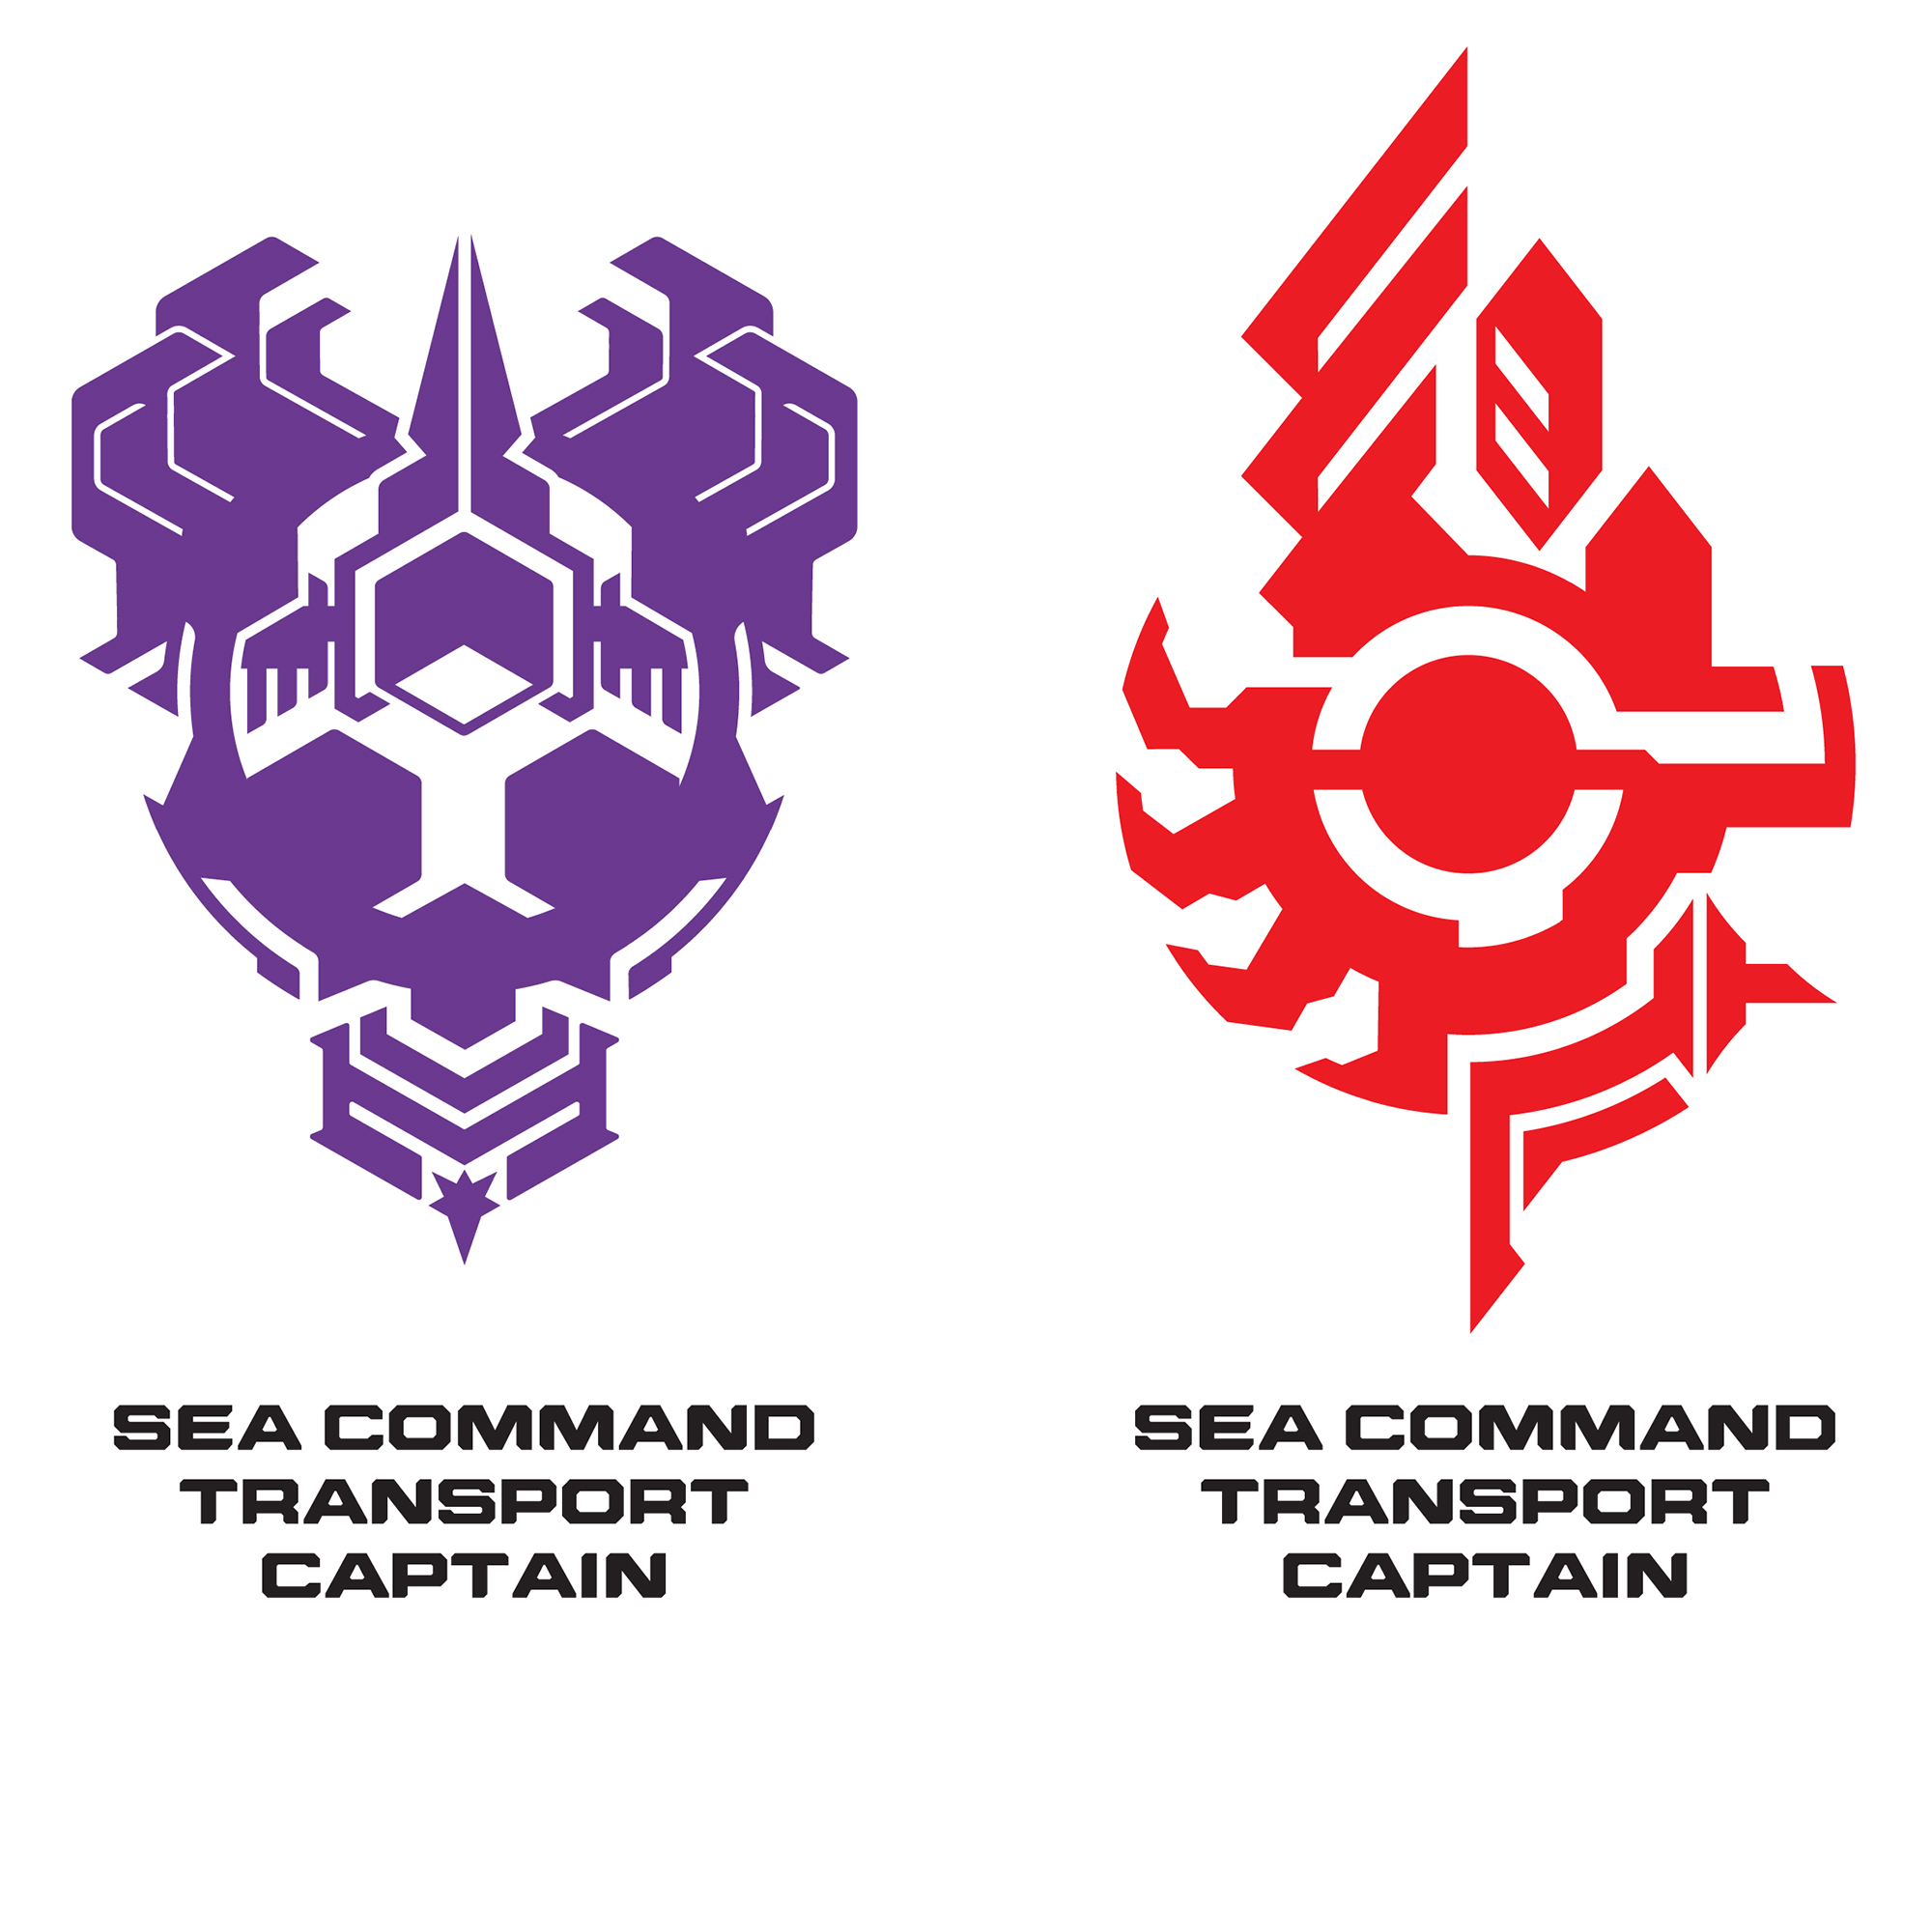 Transformers News: New Article from Hasbro Explaining the New Military Insignias in Transformers Siege